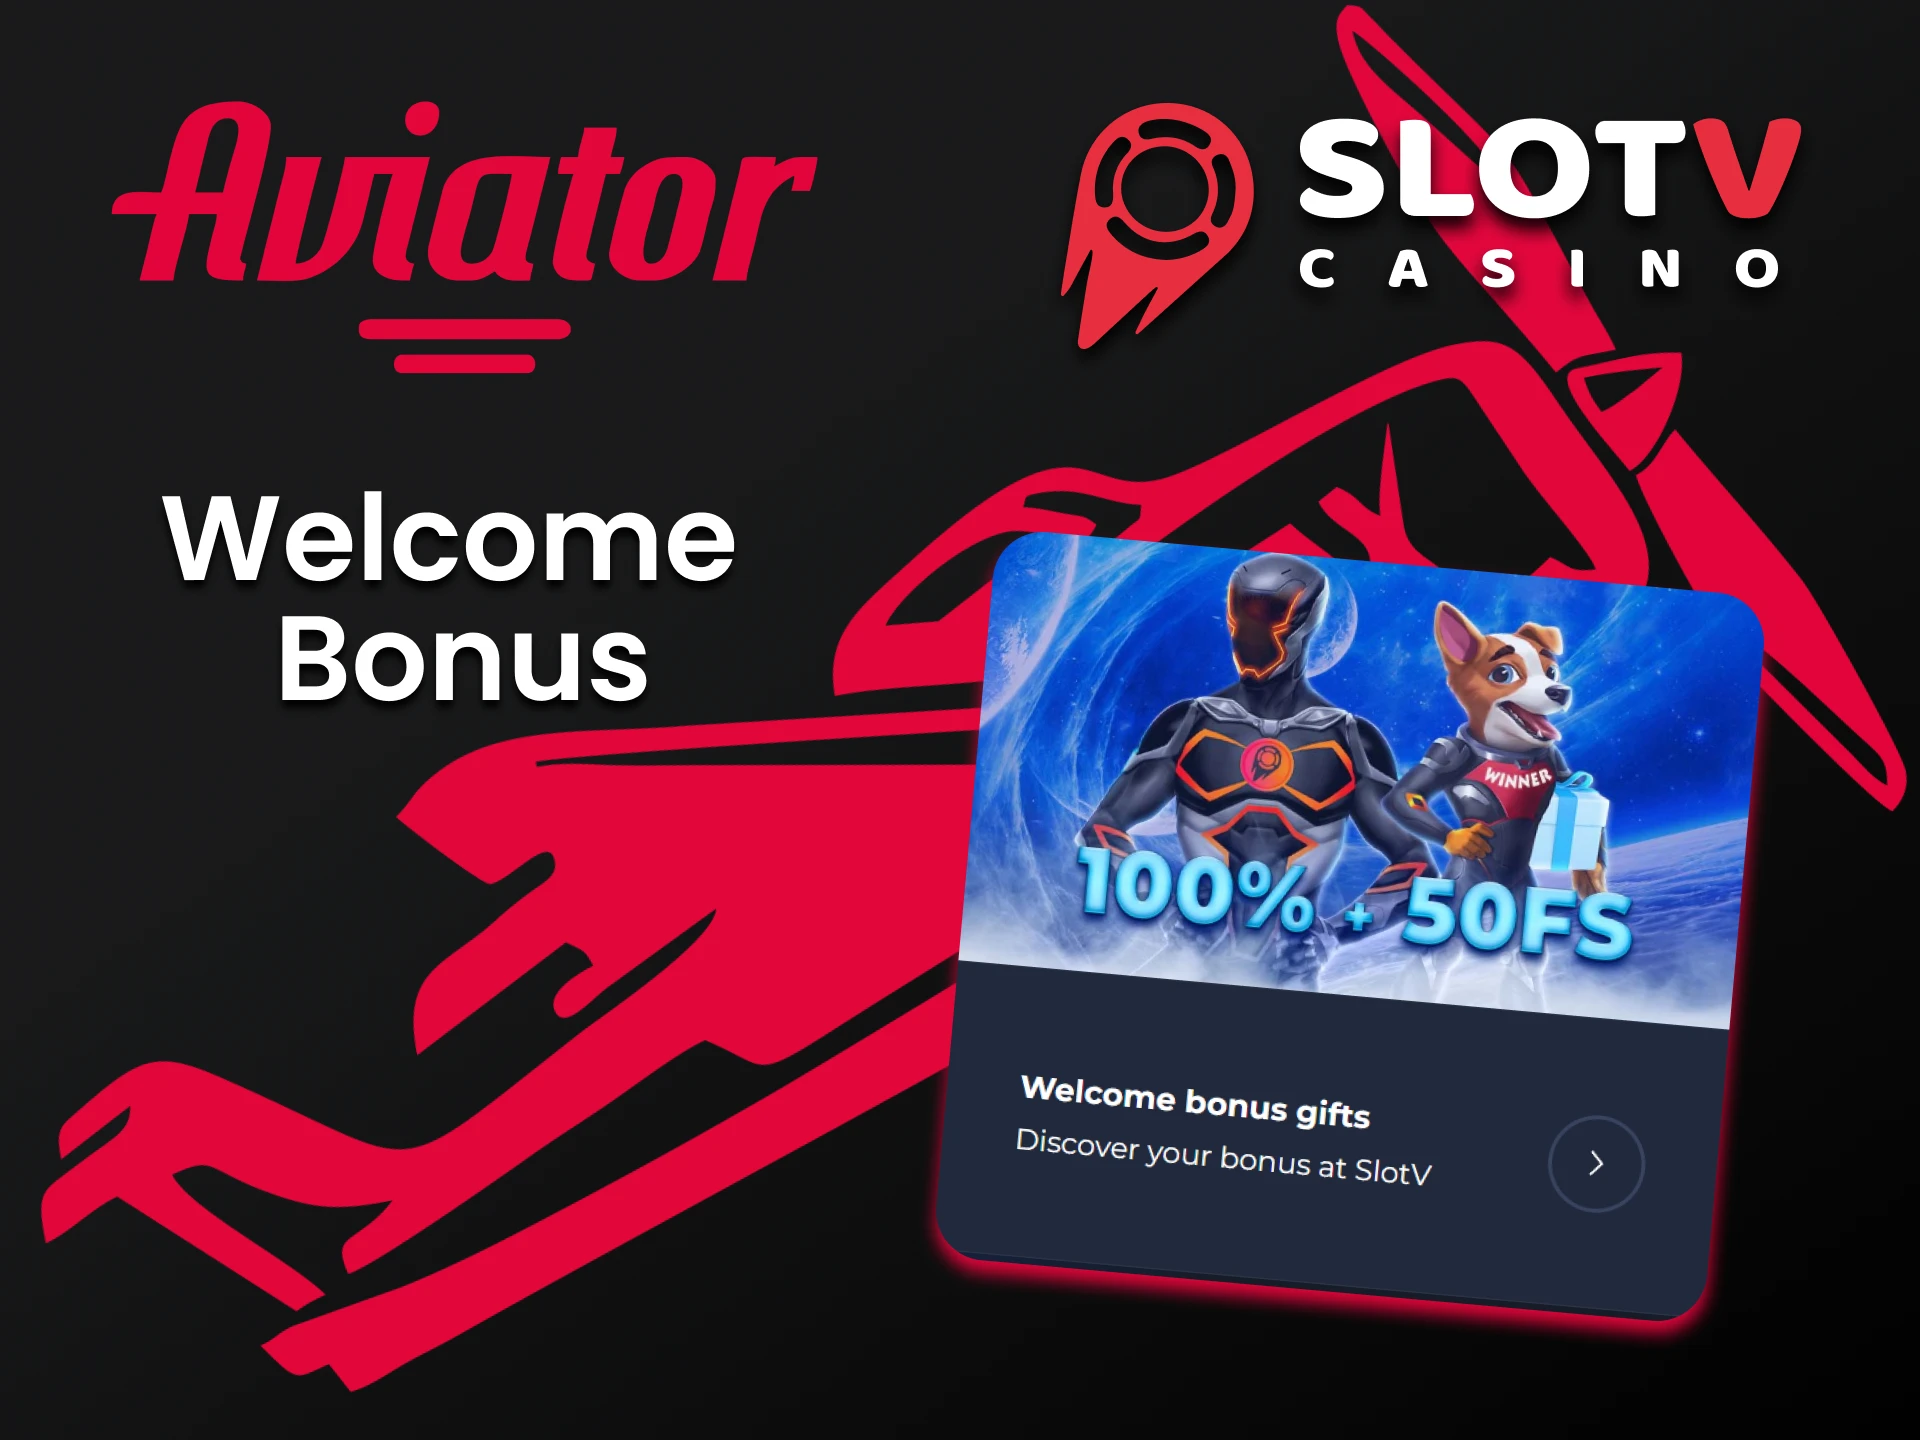 Get a welcome bonus for the Aviator from SlotV.